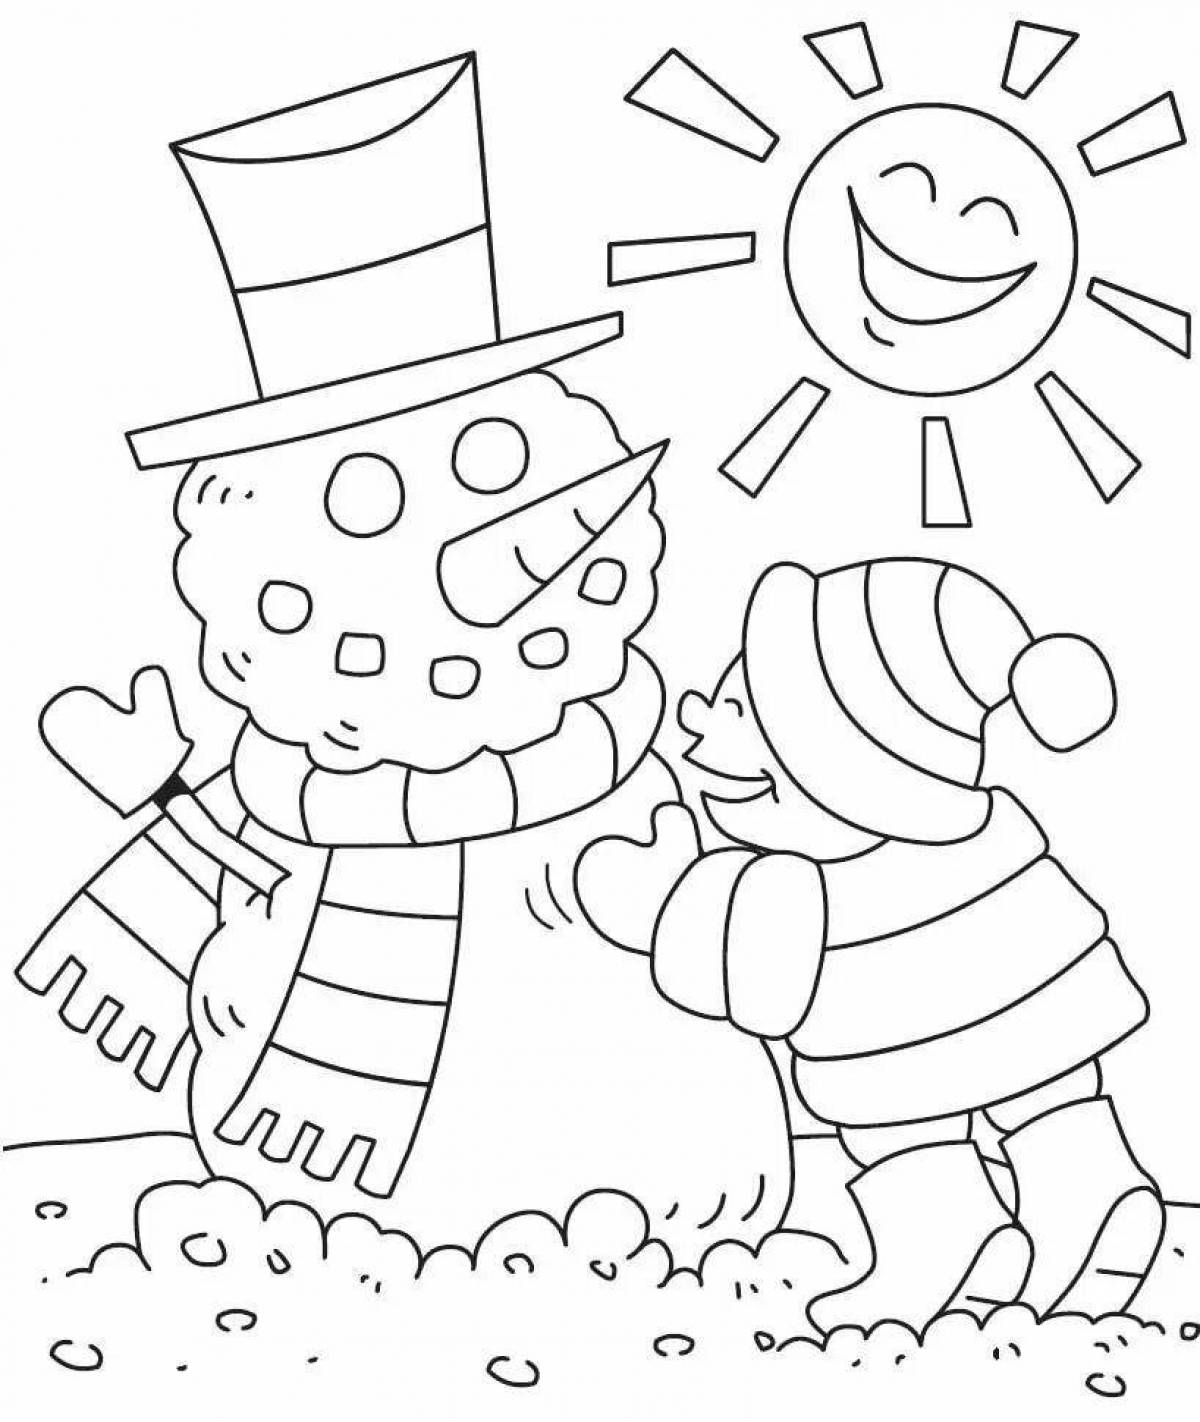 Glitter january coloring book for kids